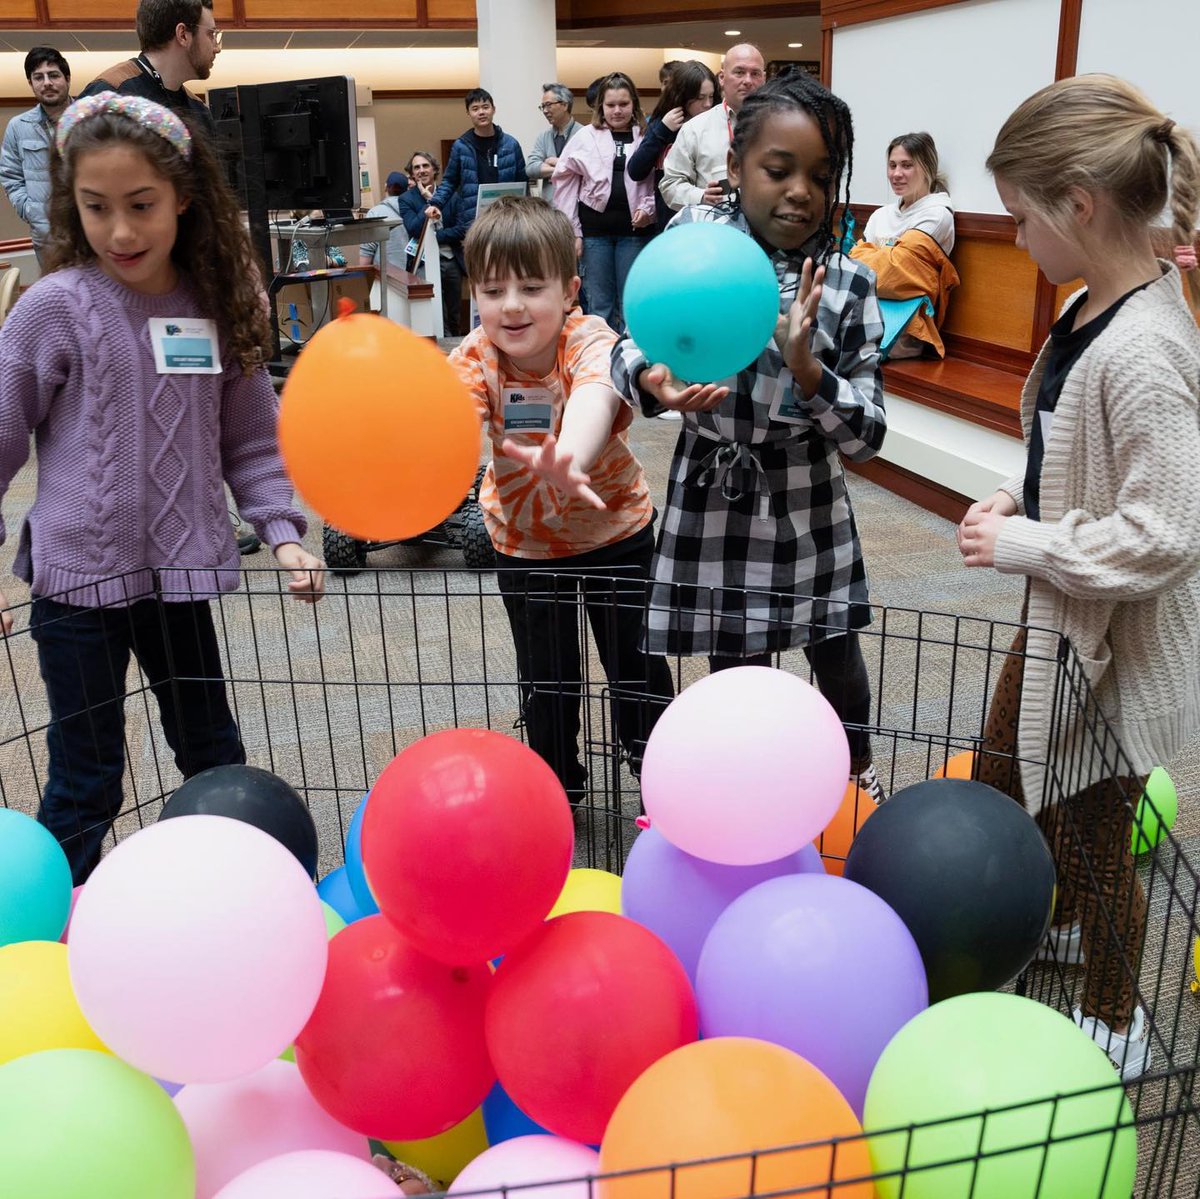 Our hallways were bustling with visitors for our annual Kids Day! This two-day event, offers kids the opportunity to explore interests in #STEM and learn about the diverse career opportunities at the Laboratory.

Photos: Glen Cooper & Nicole Fandel

#STEMeducation